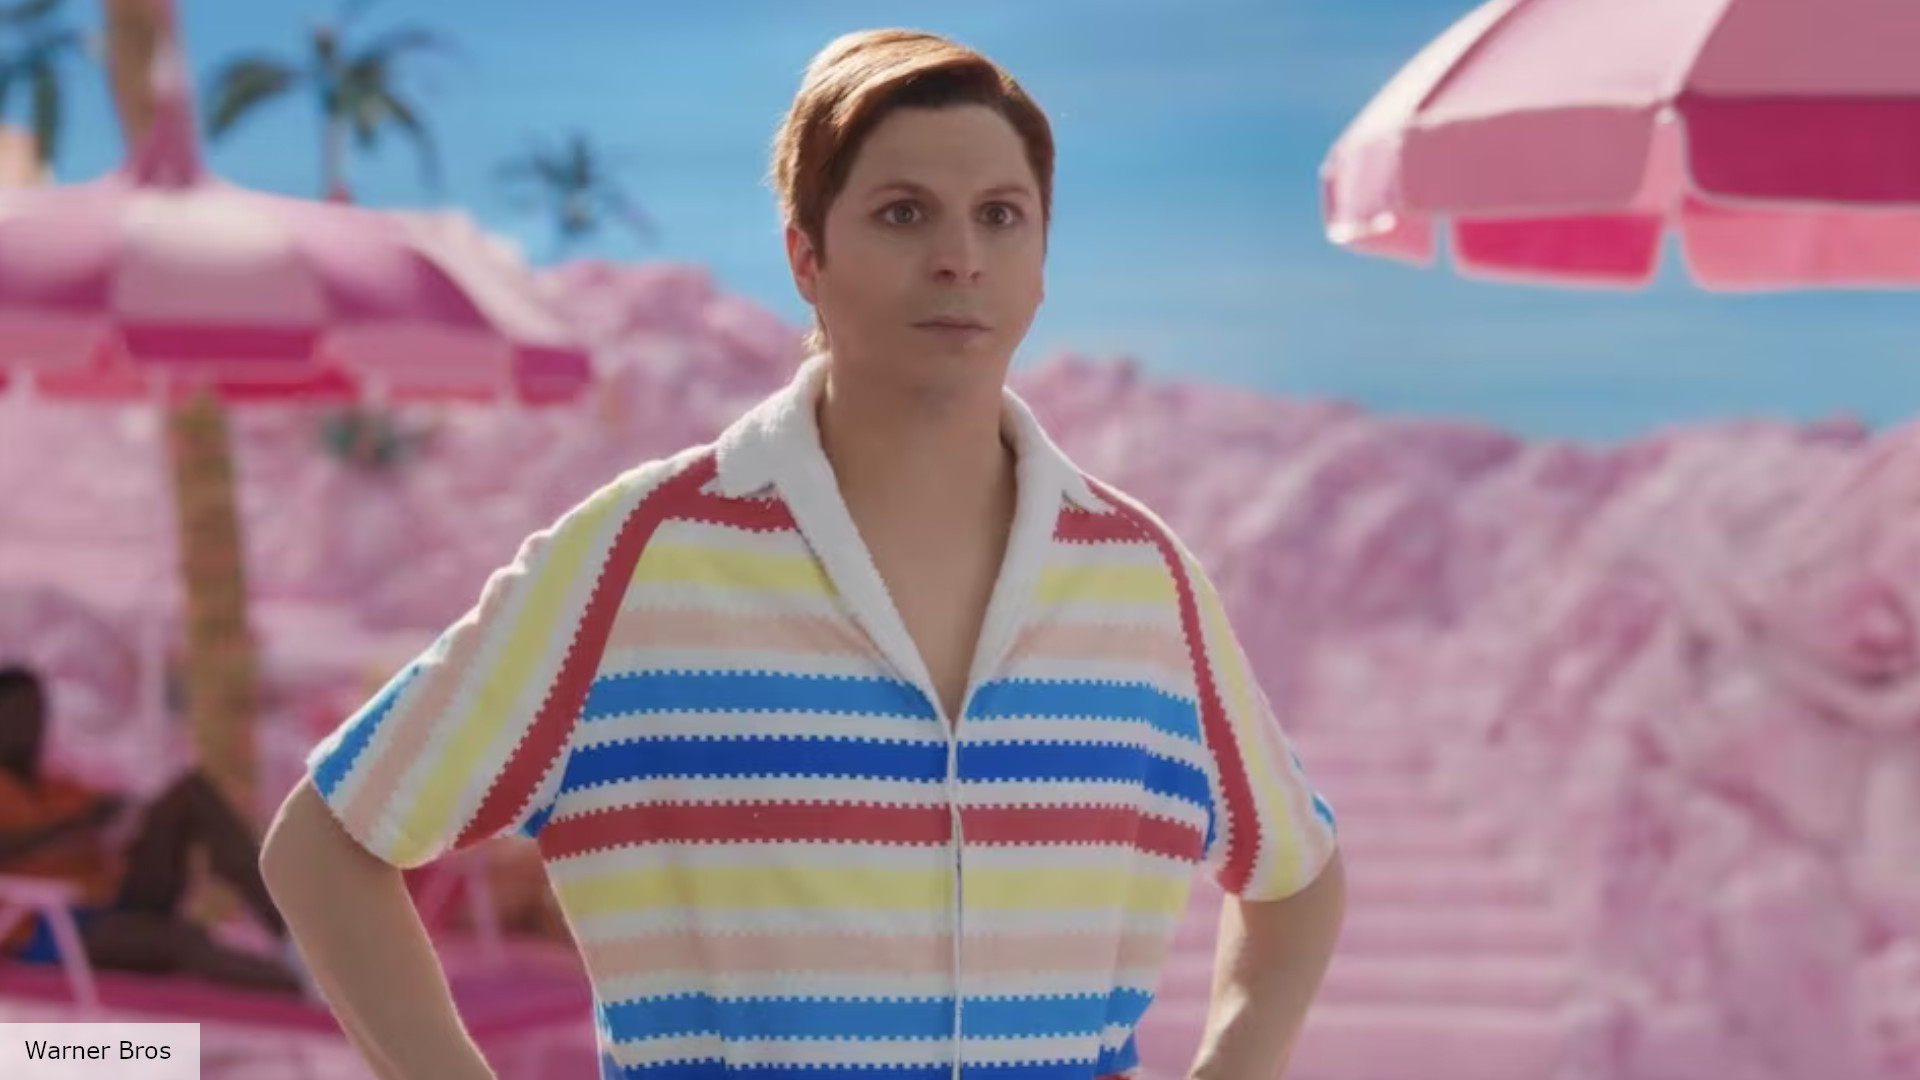 Allan in the Barbie movie explained — who does Michael Cera play?